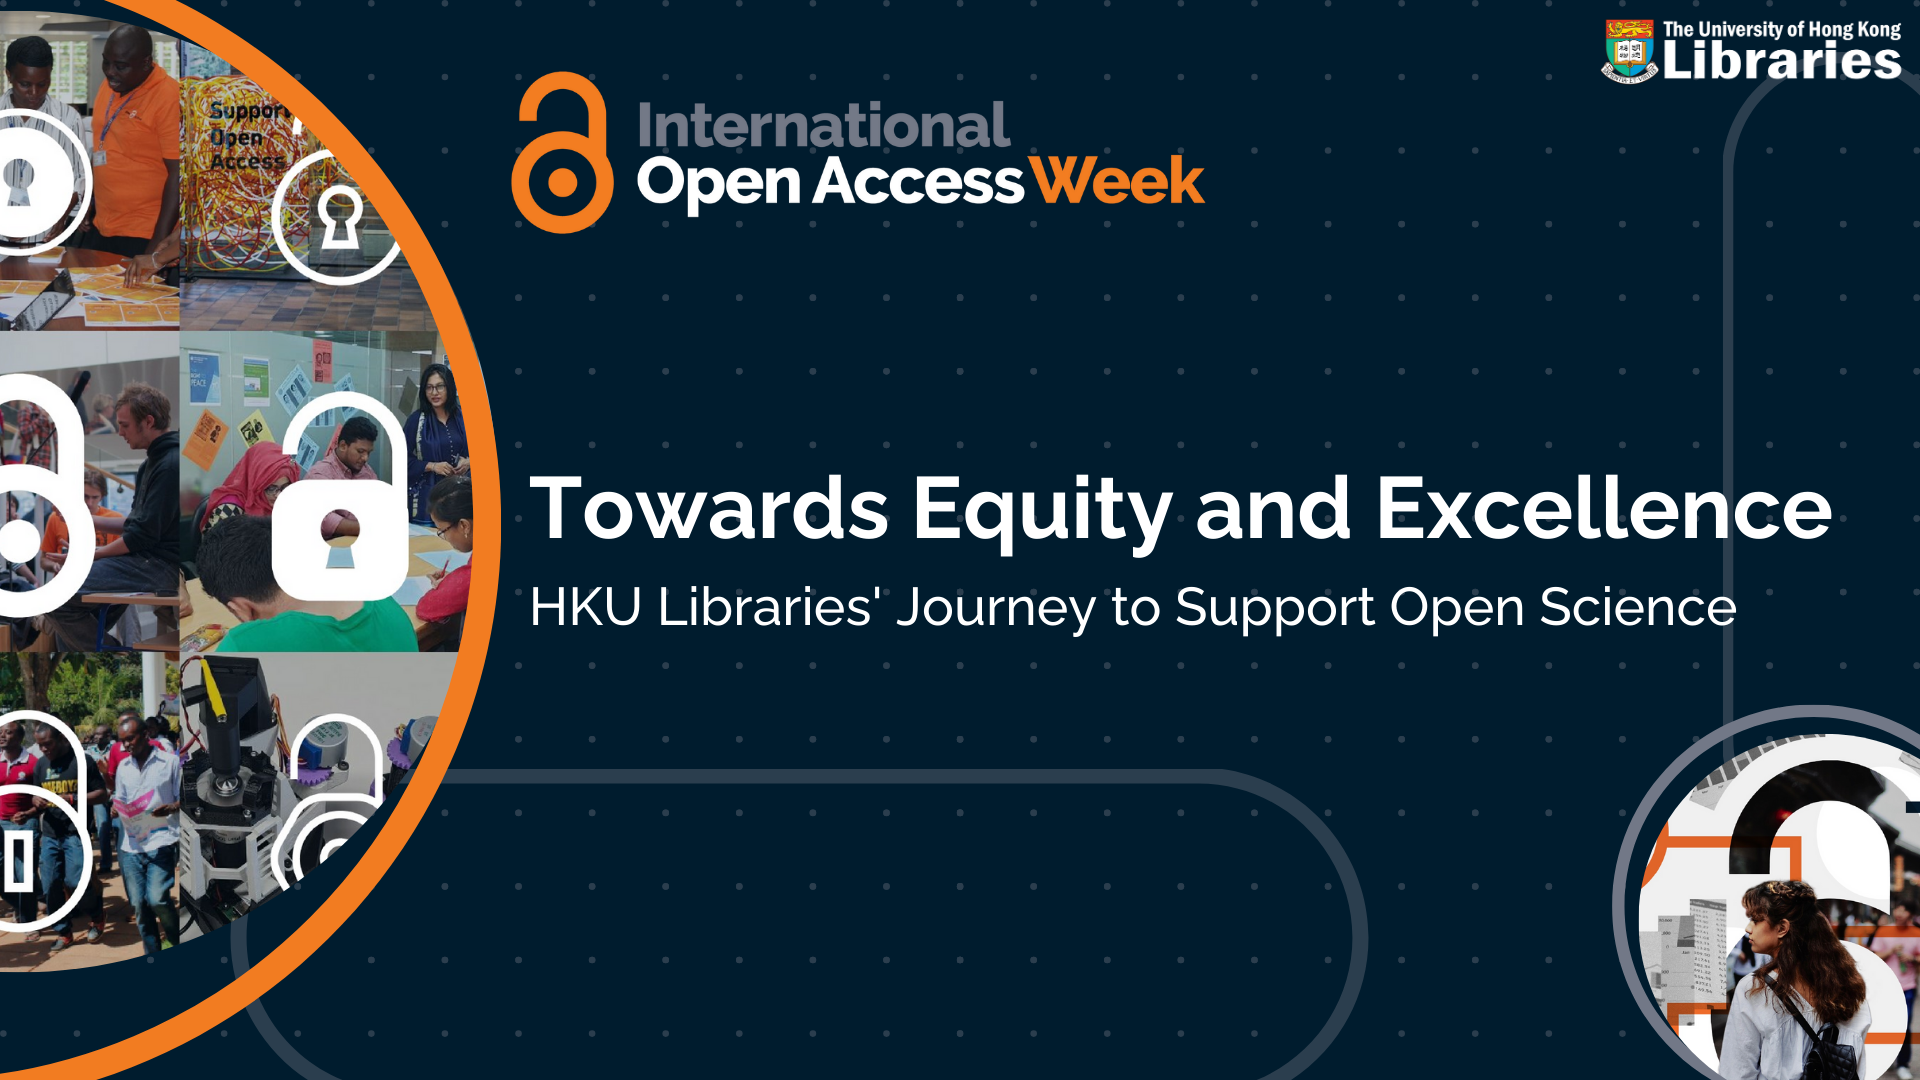 Towards Equity and Excellence - HKU Libraries' Journey to Support Open Science